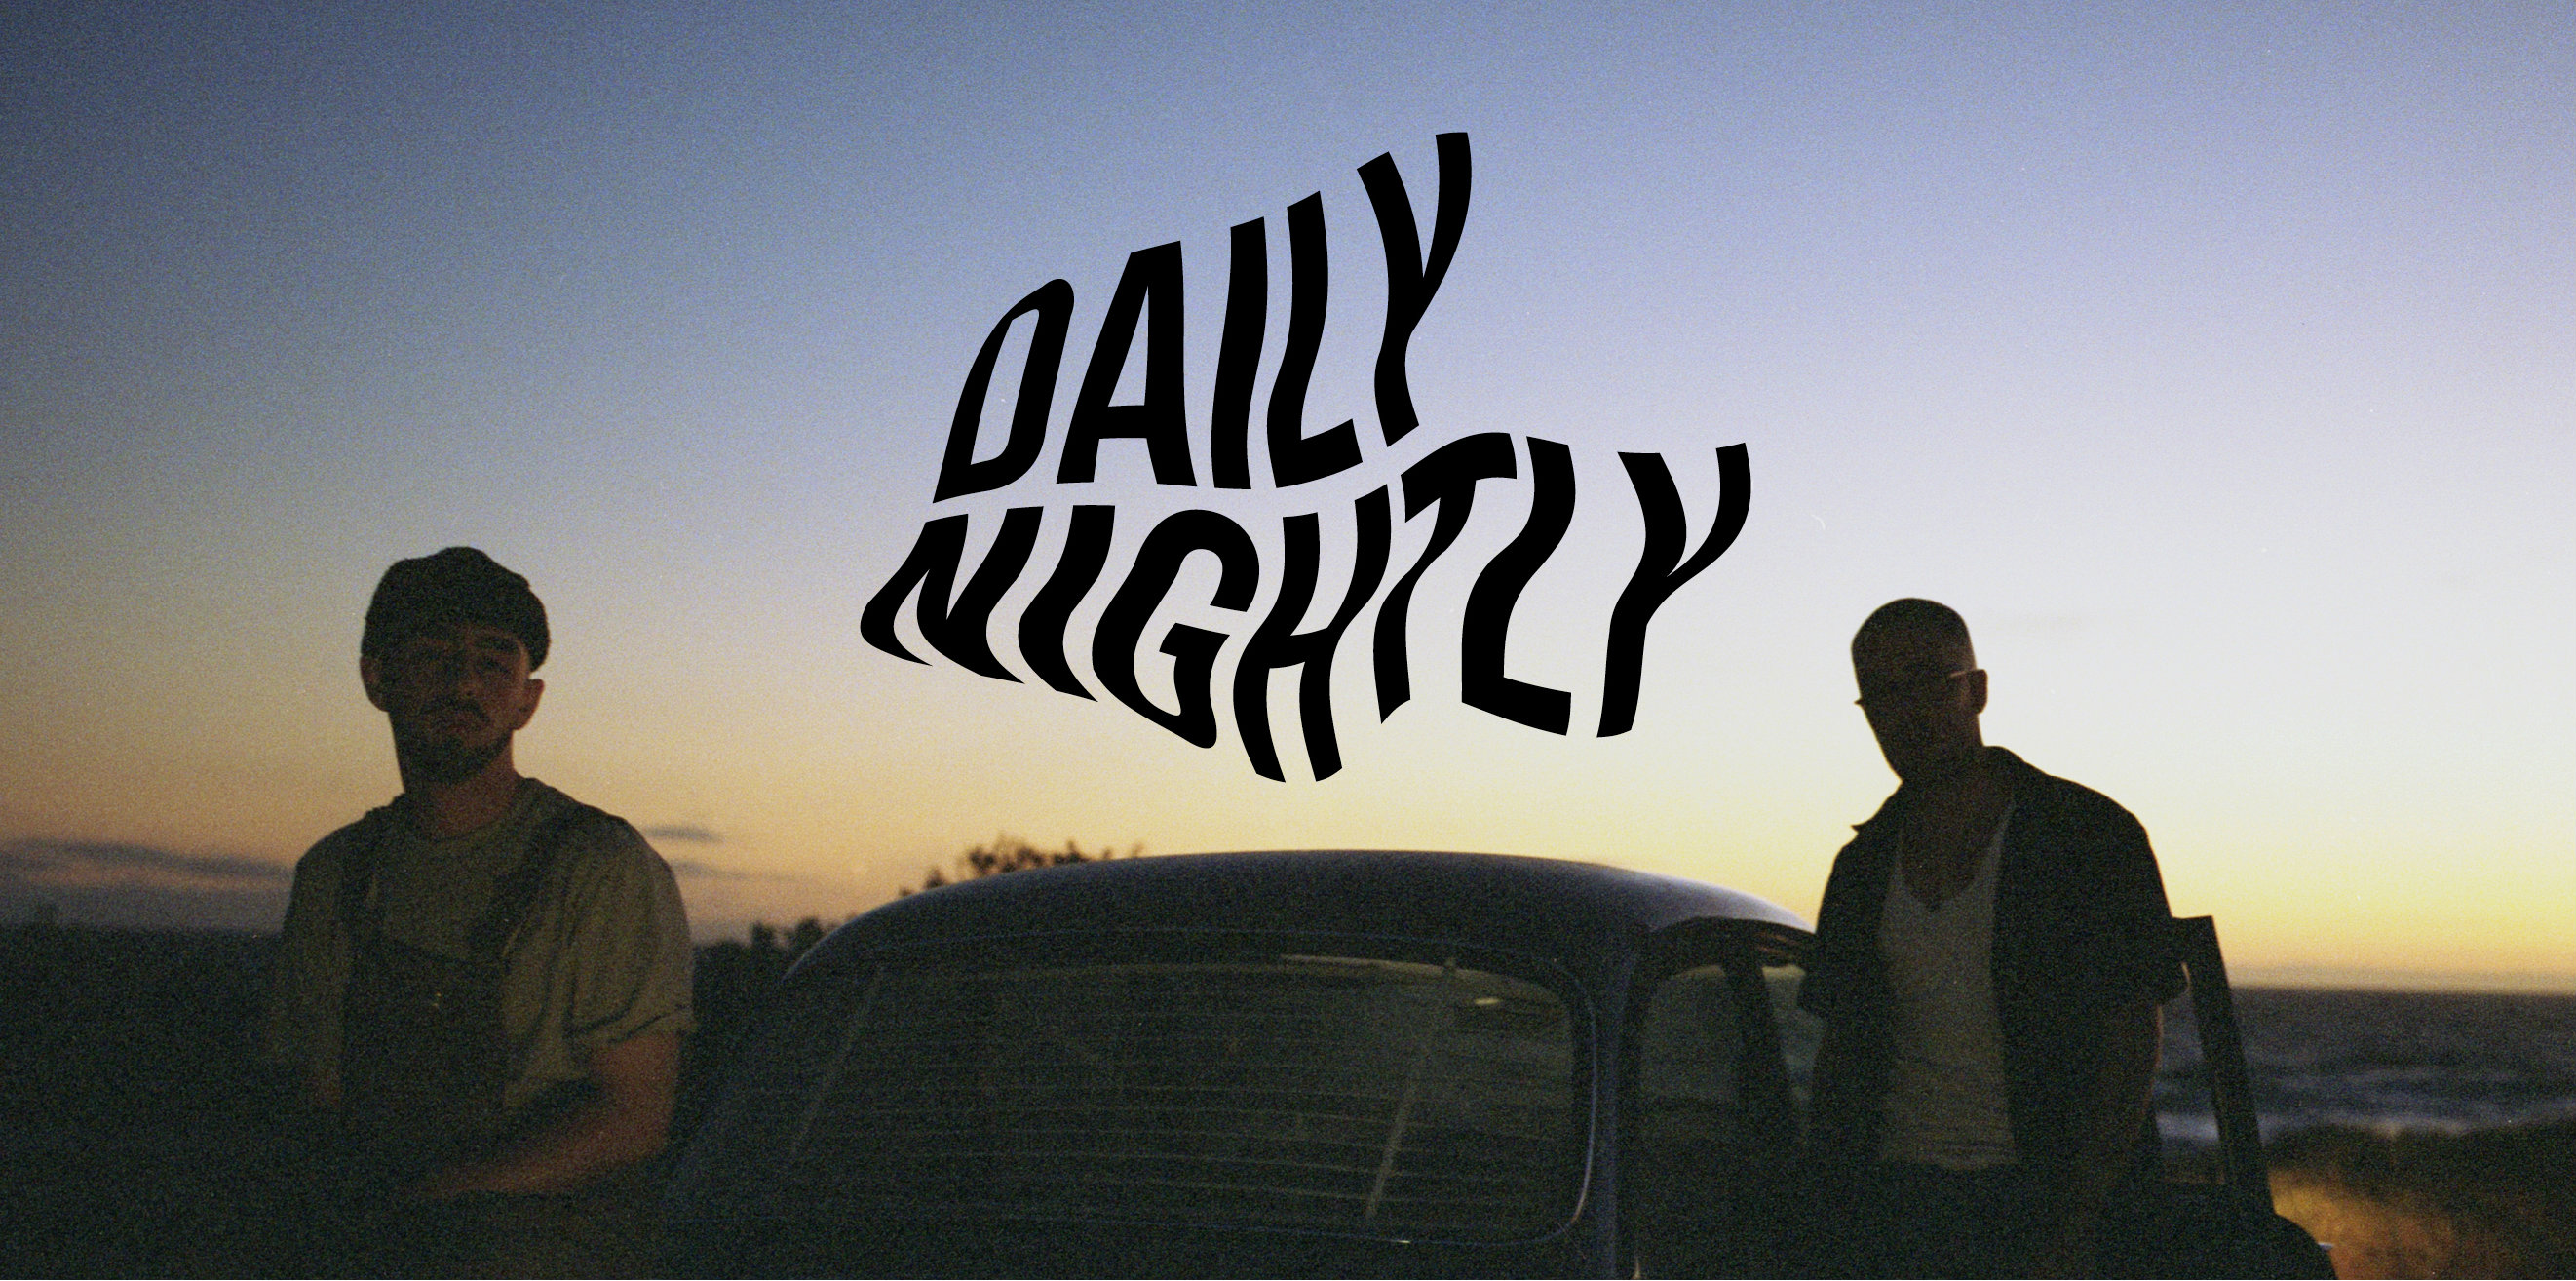 EXCLUSIVE: Untitled Group team up with Caroline Australia to launch ‘Daily Nightly’ record label